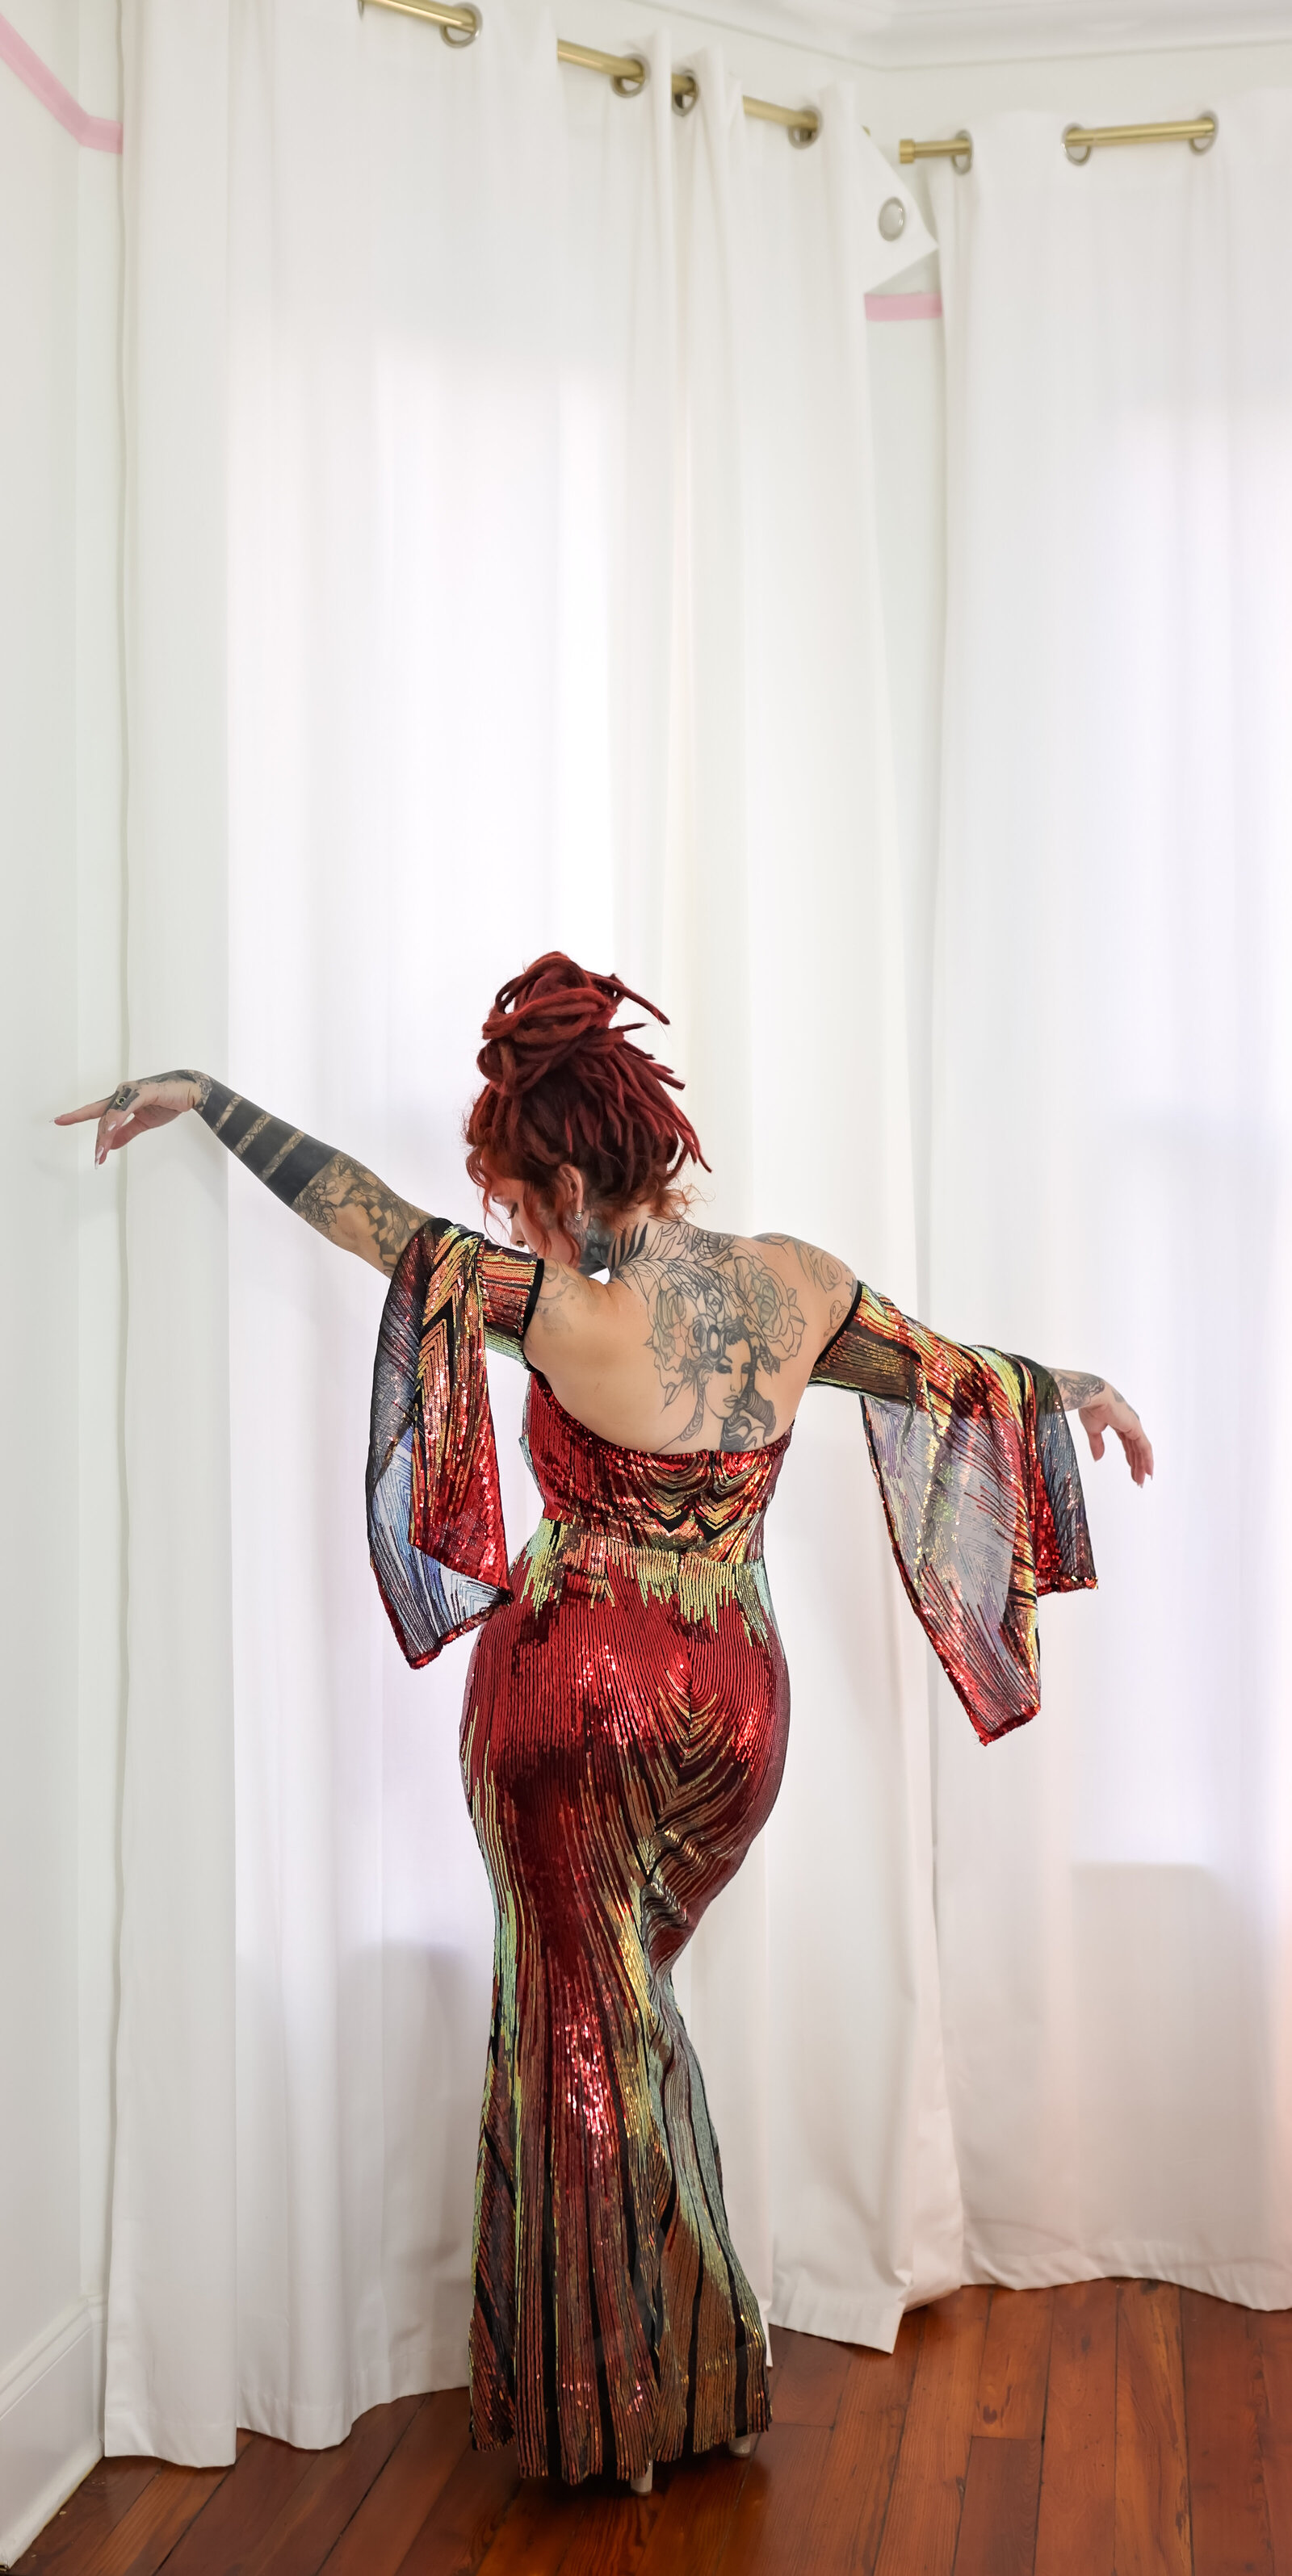 Savannah Boudoir Photography and Glamour showcases gorgeous red headed woman with dreads in colorful and sparkly designer glamour gown